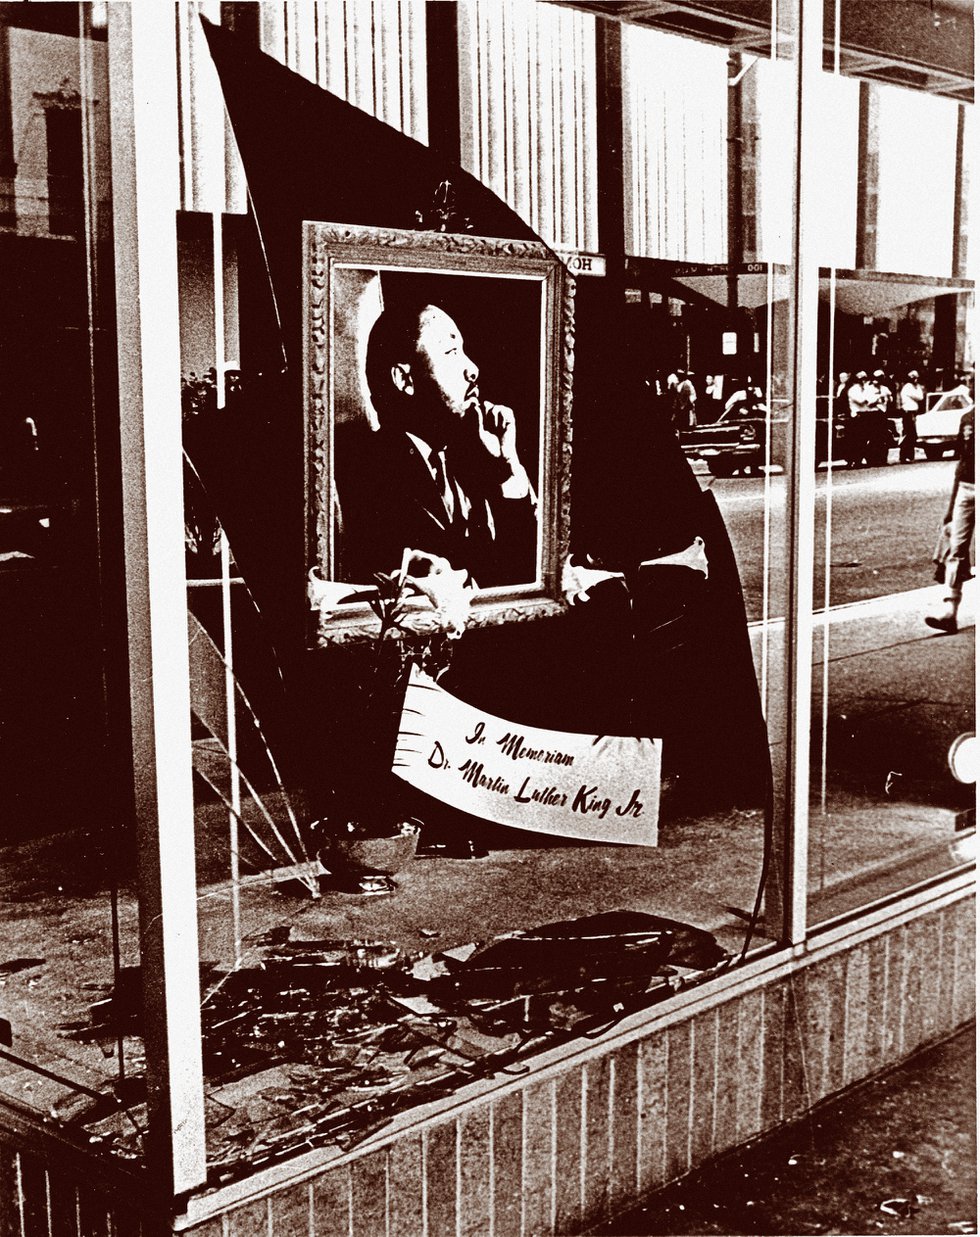 A storefront window on North Main Street, shattered by the riots and demonstrations that followed King’s death, was transformed into a makeshift memorial to the civil rights leader.